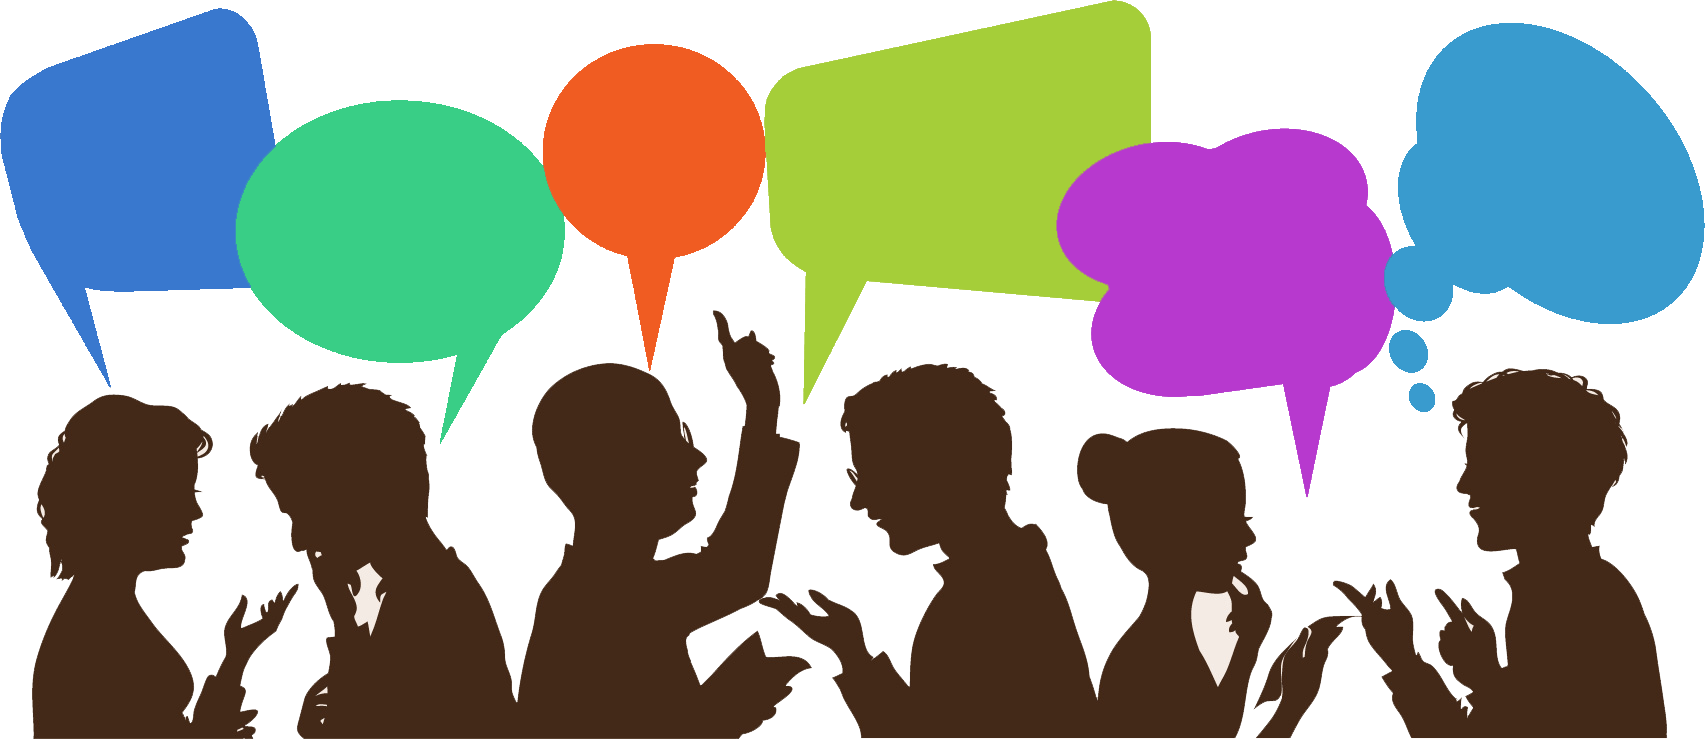 clipart about Effective English Conversations - English, Find more high qua...